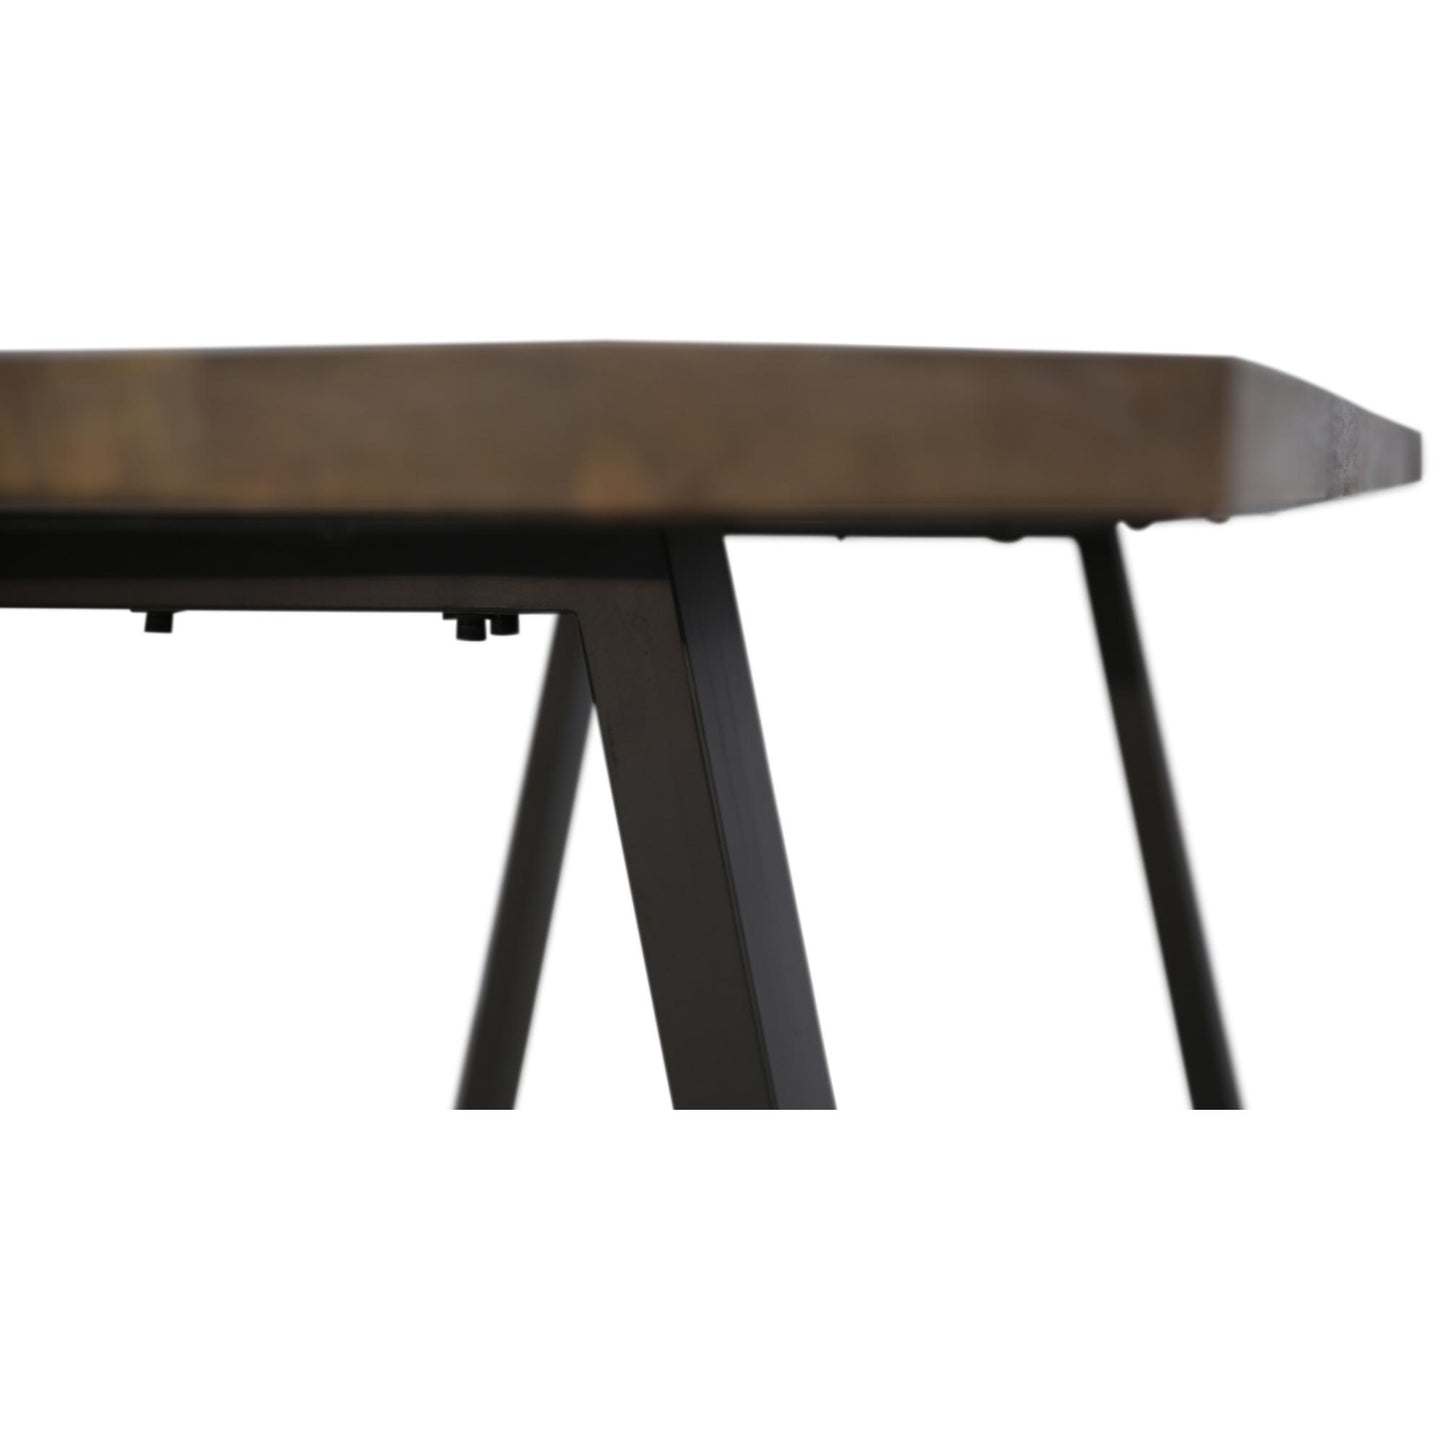 Begonia Live Edge Solid Mango Wood Dining Table 220cm